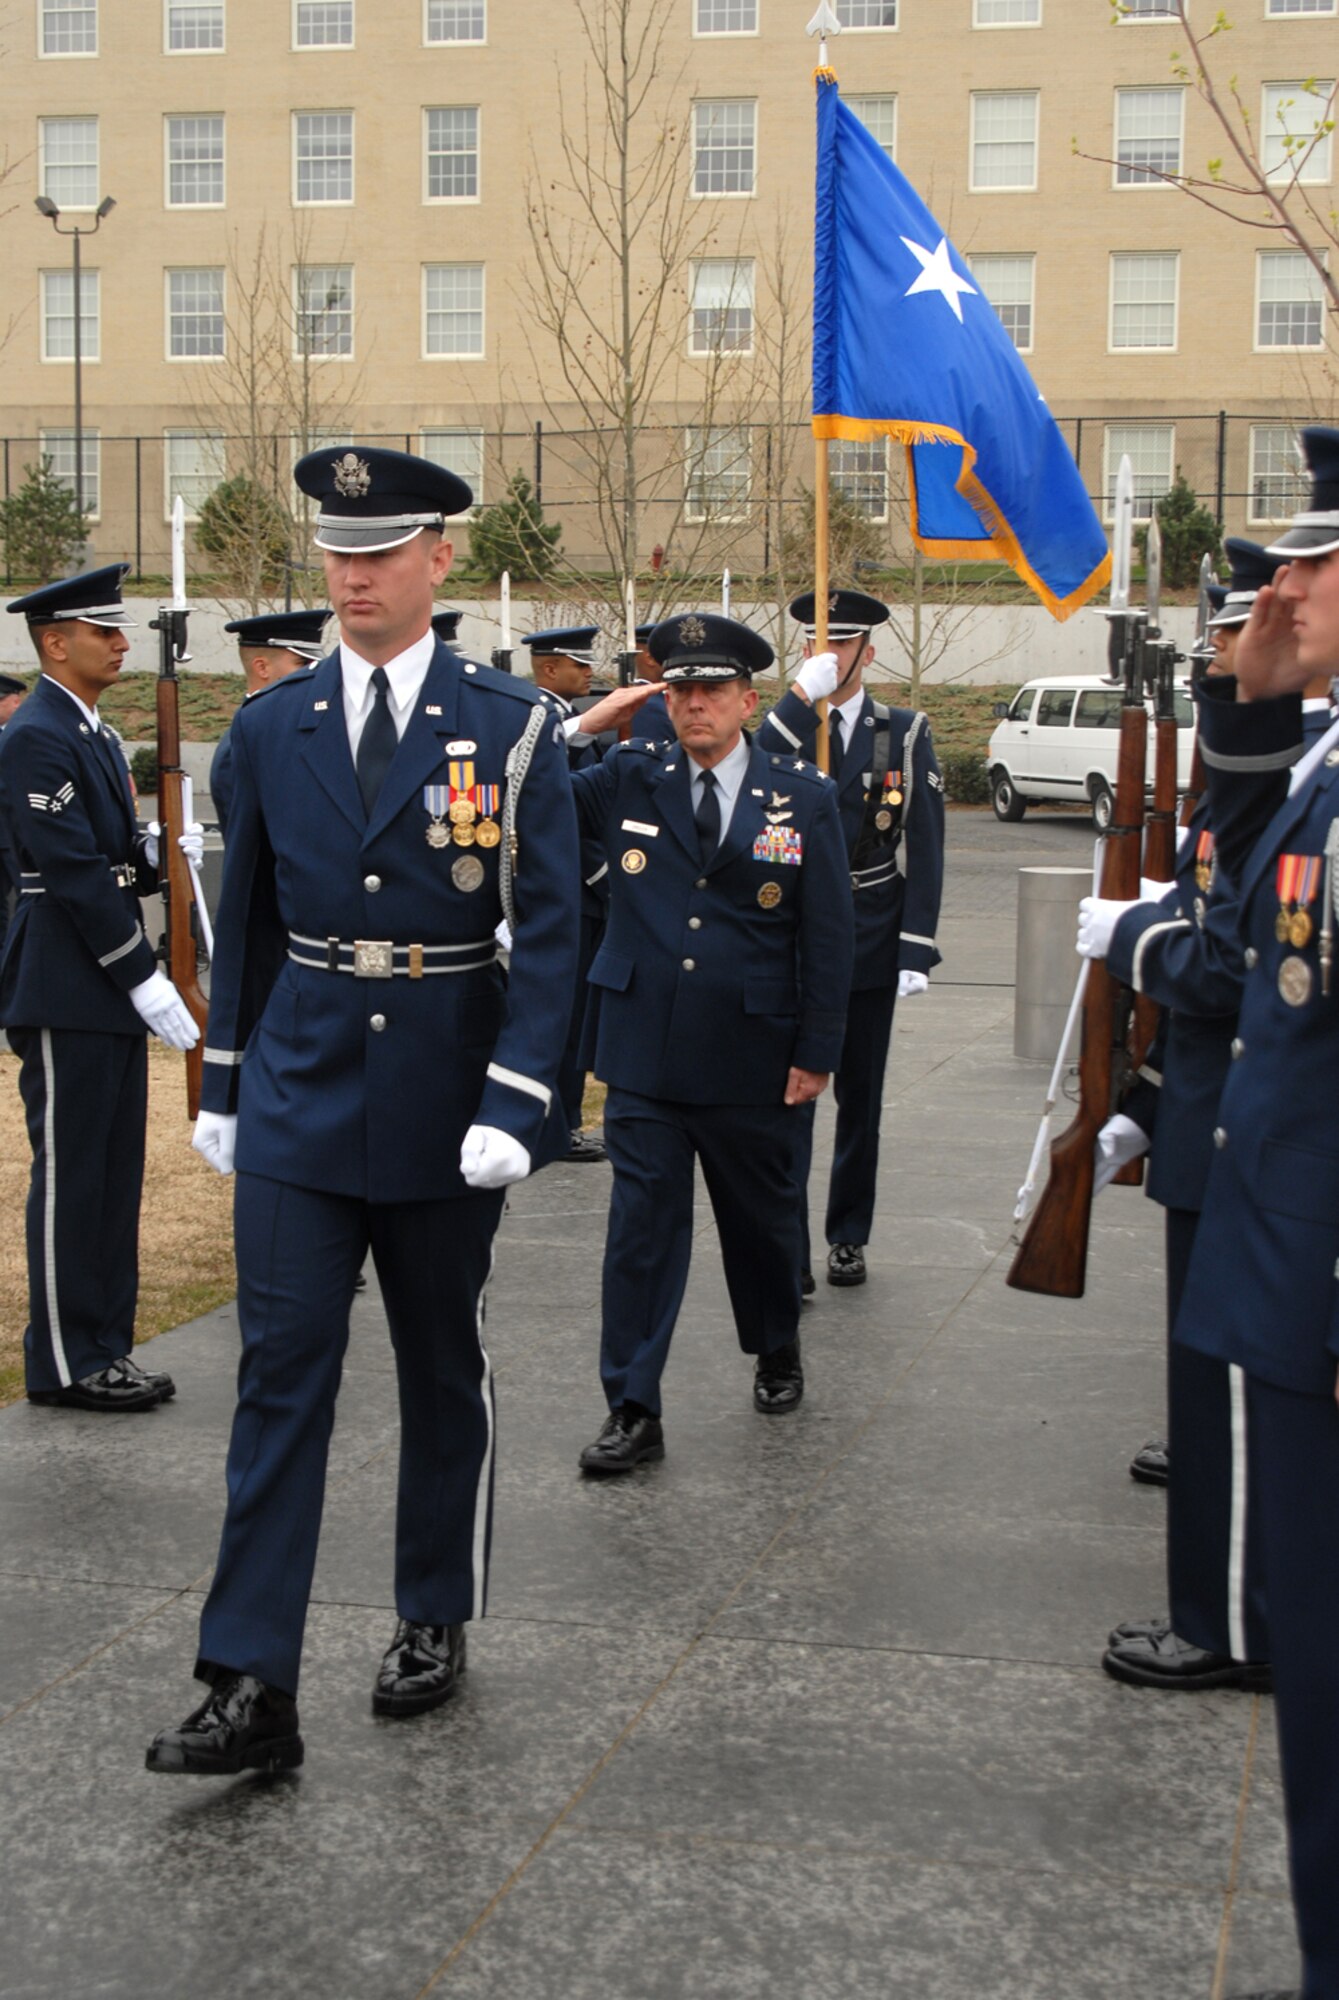 ARLINGTON, Va. -- First Lt. Brent Mundie, Air Force Honor Guard ceremonial guardsman, leads Maj. Gen. Robert Smolen, Air Force District of Washington commander, through the arrival cordon before beginning the Air Force Review ceremony held April 14 at the Air Force memorial.  